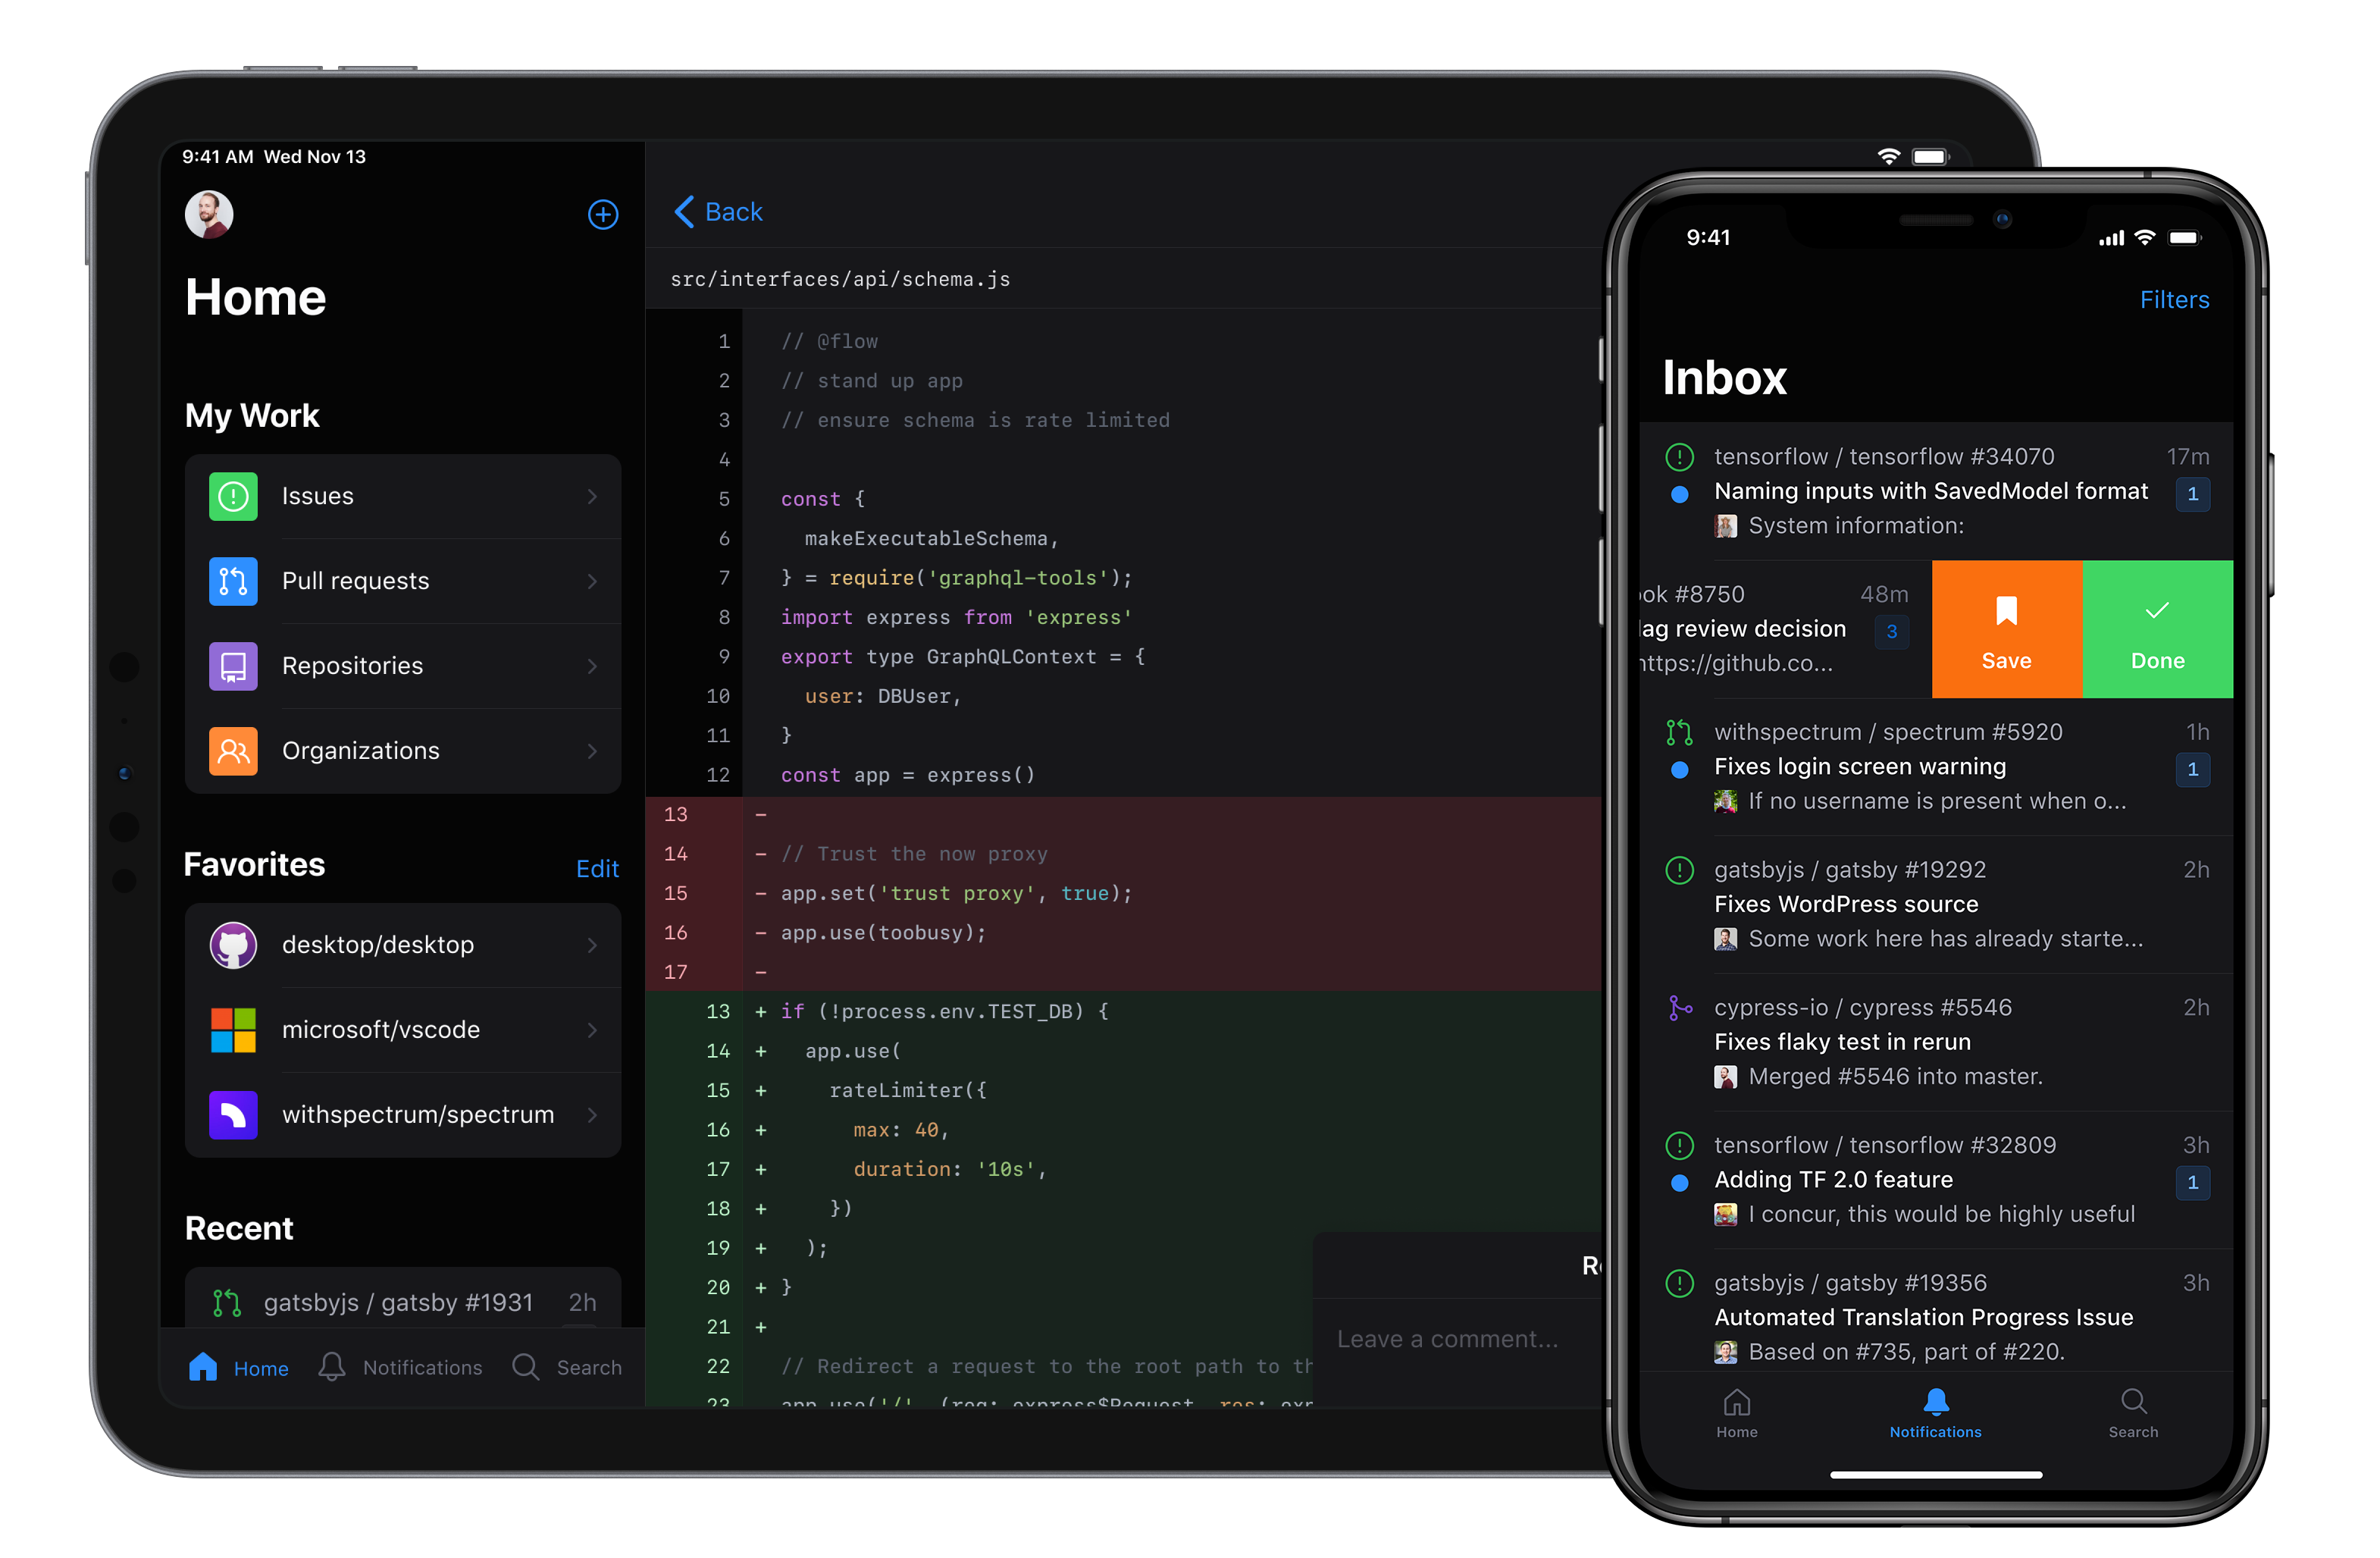 Dark mode is availble for every screen size and device.